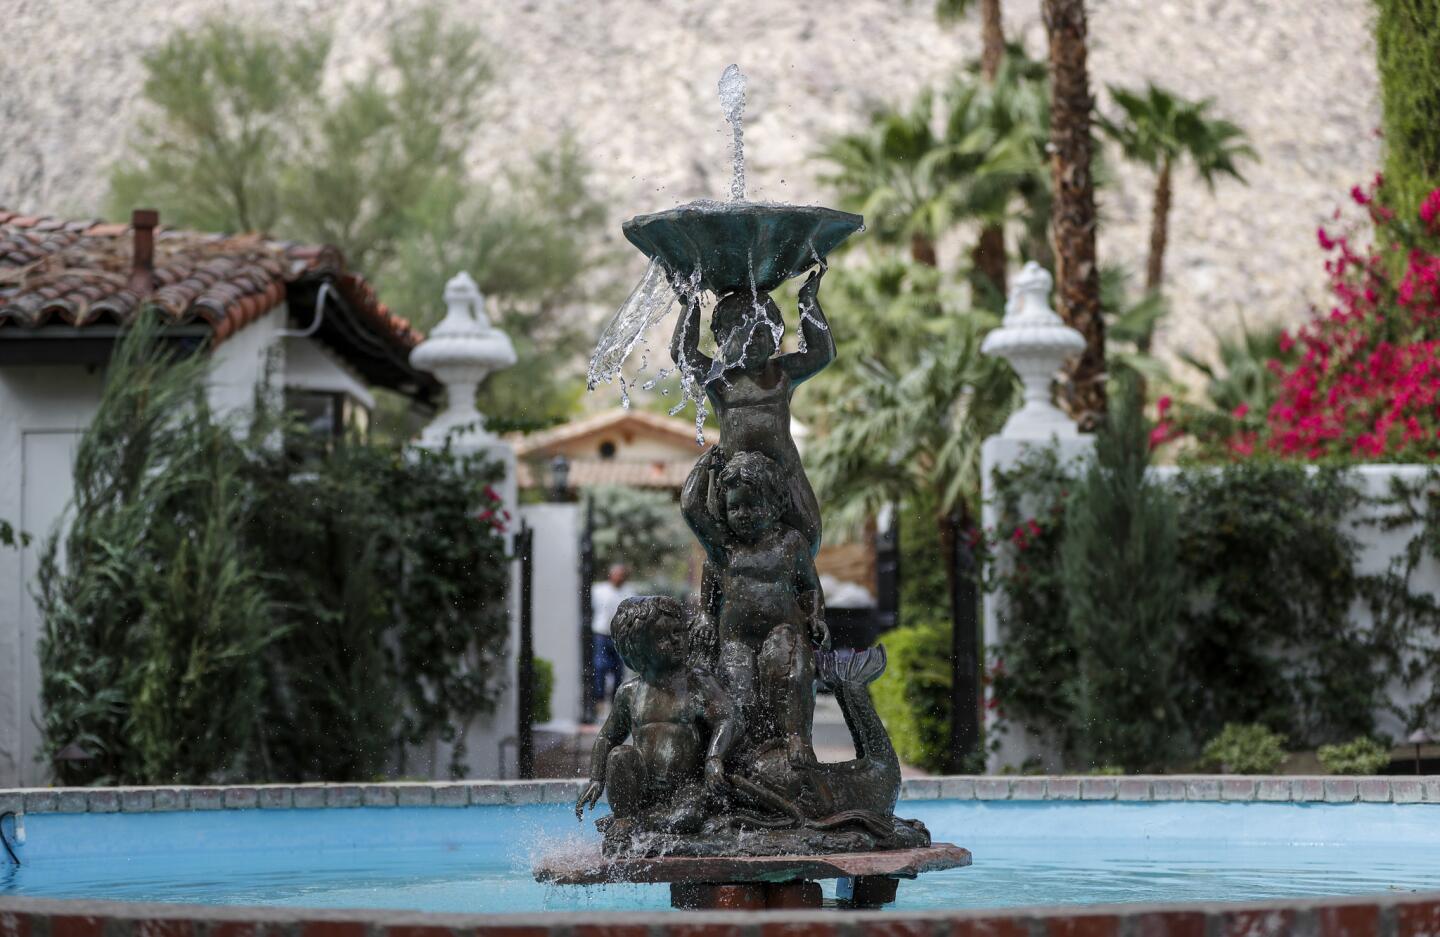 What's new in Palm Springs